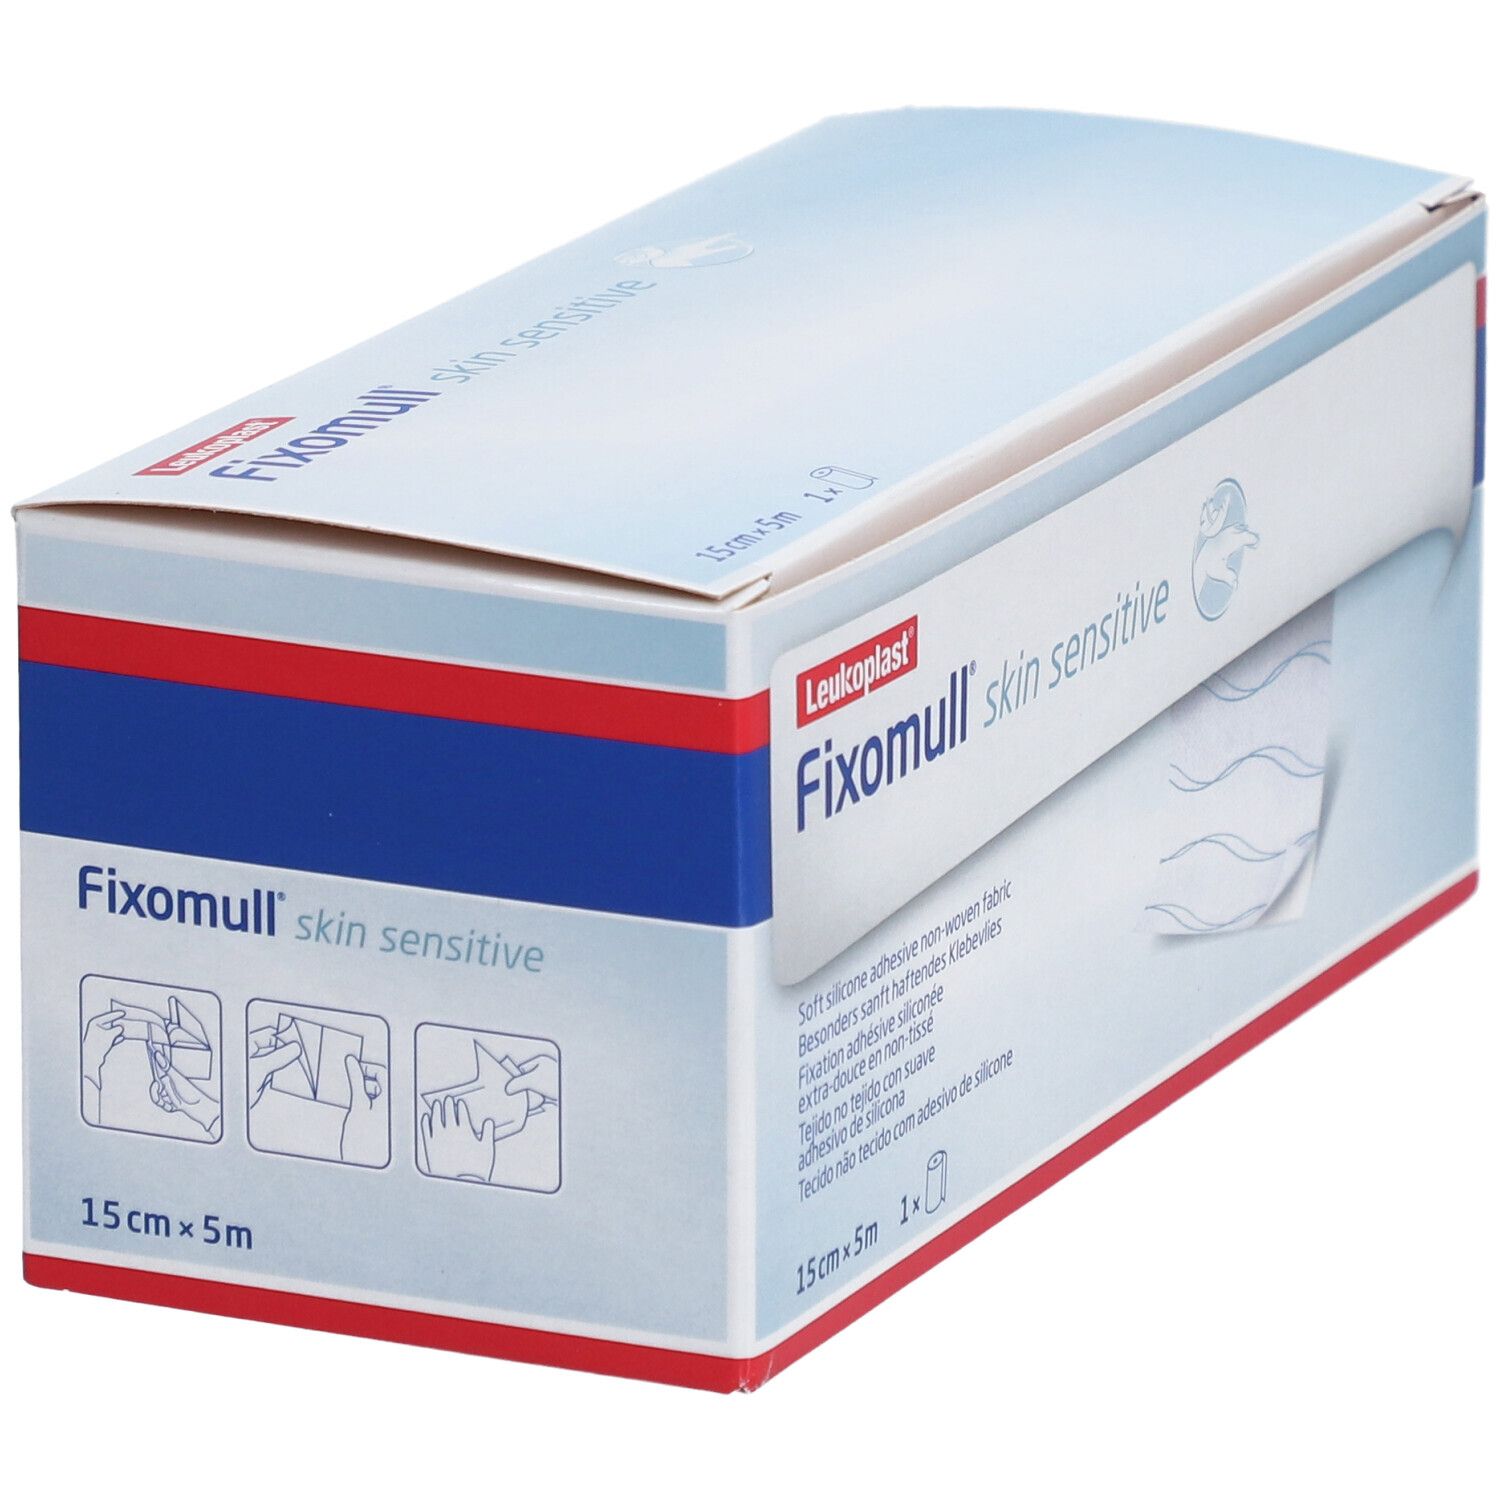 Fixomull® gentle touch 15 cm x 5 m